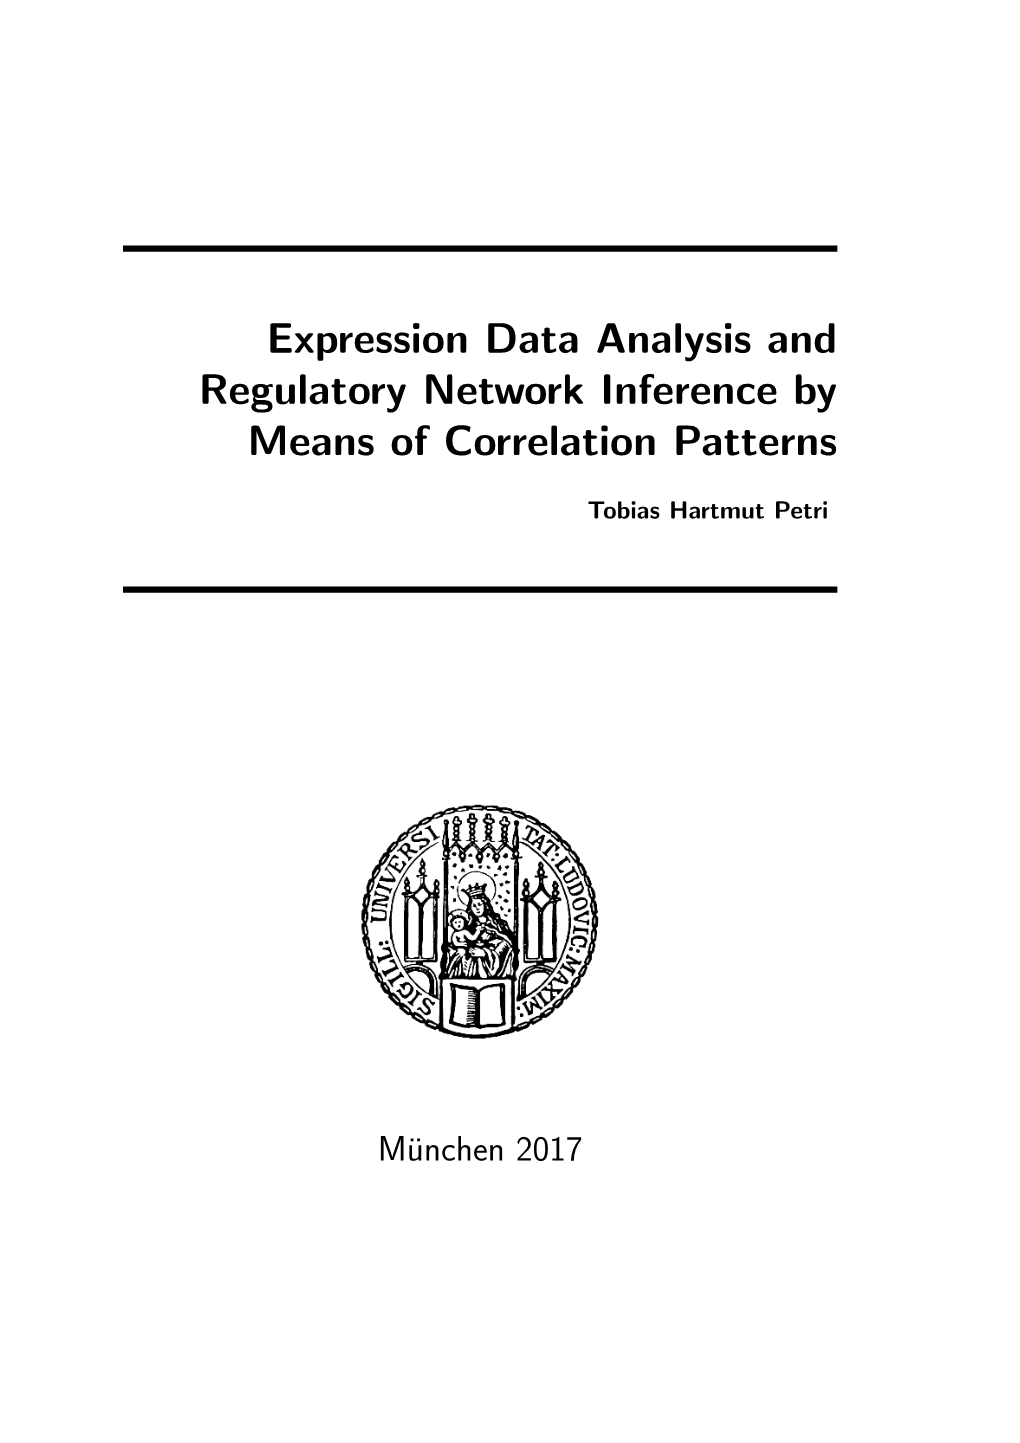 Expression Data Analysis and Regulatory Network Inference by Means of Correlation Patterns